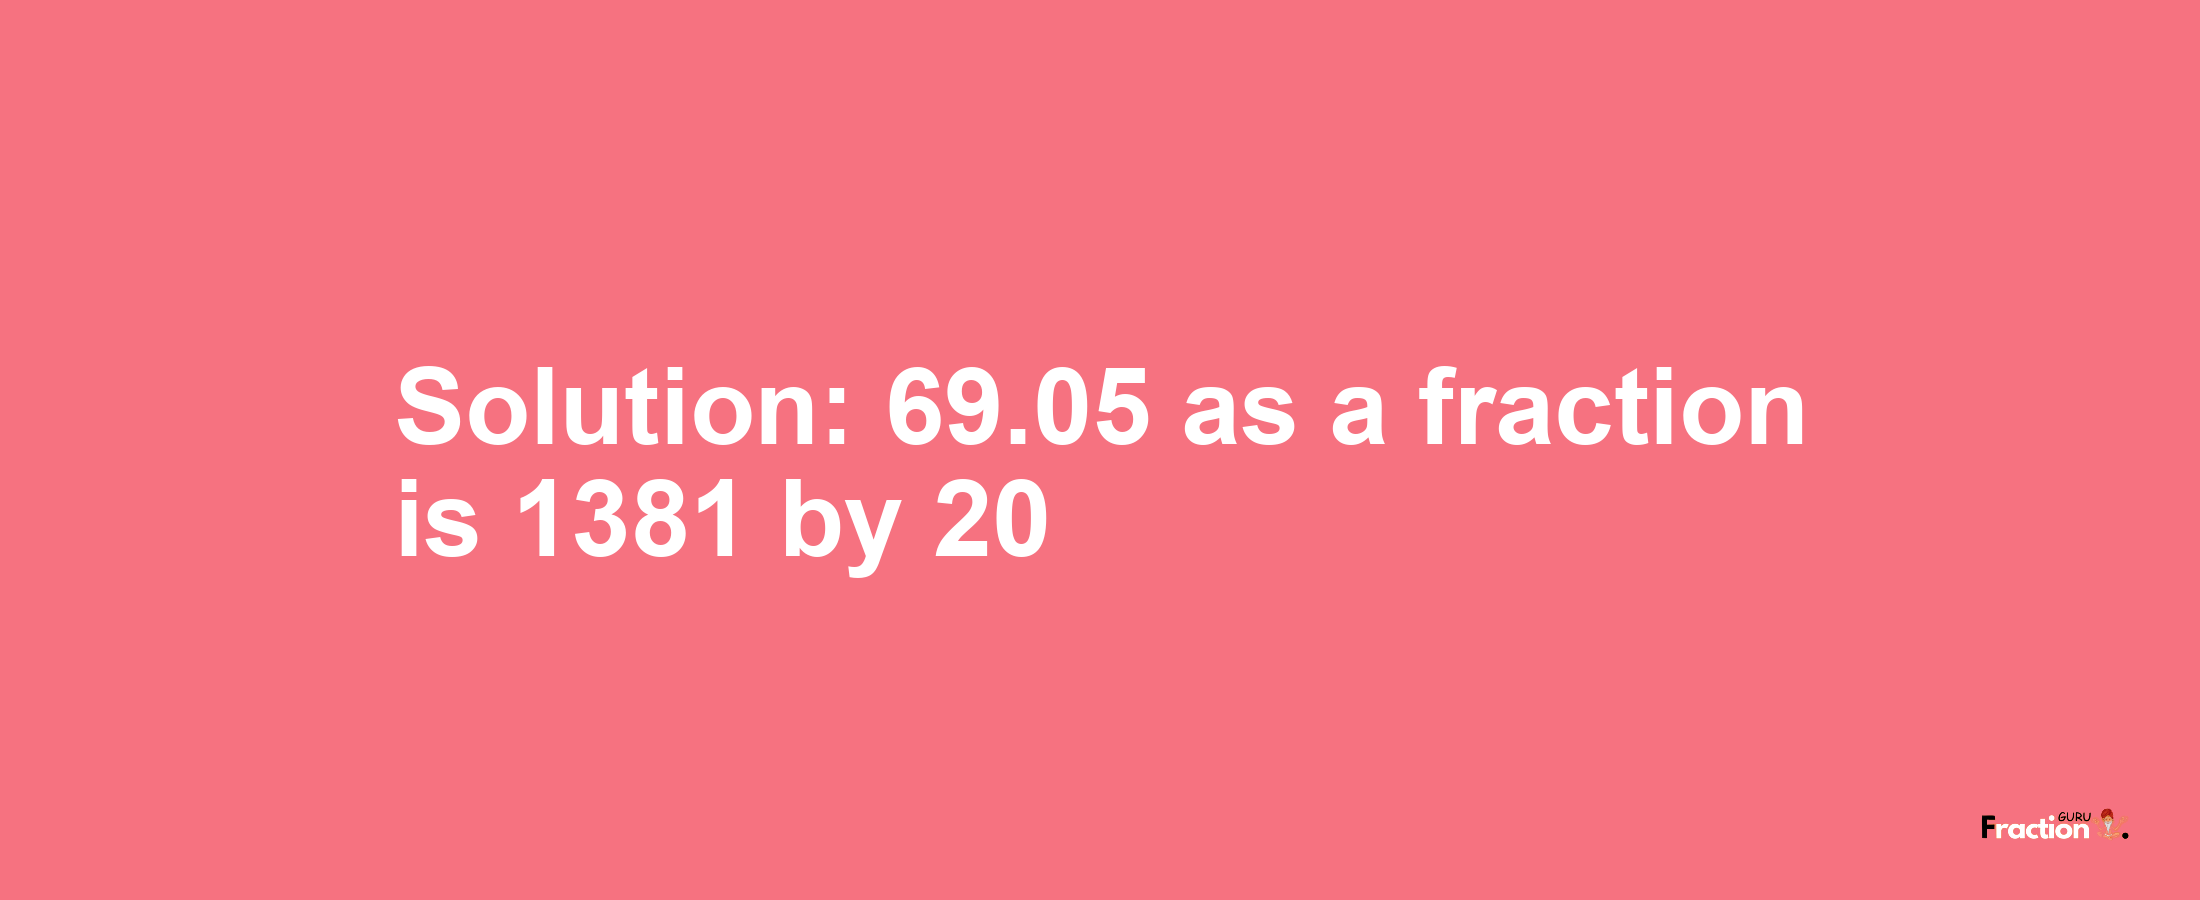 Solution:69.05 as a fraction is 1381/20